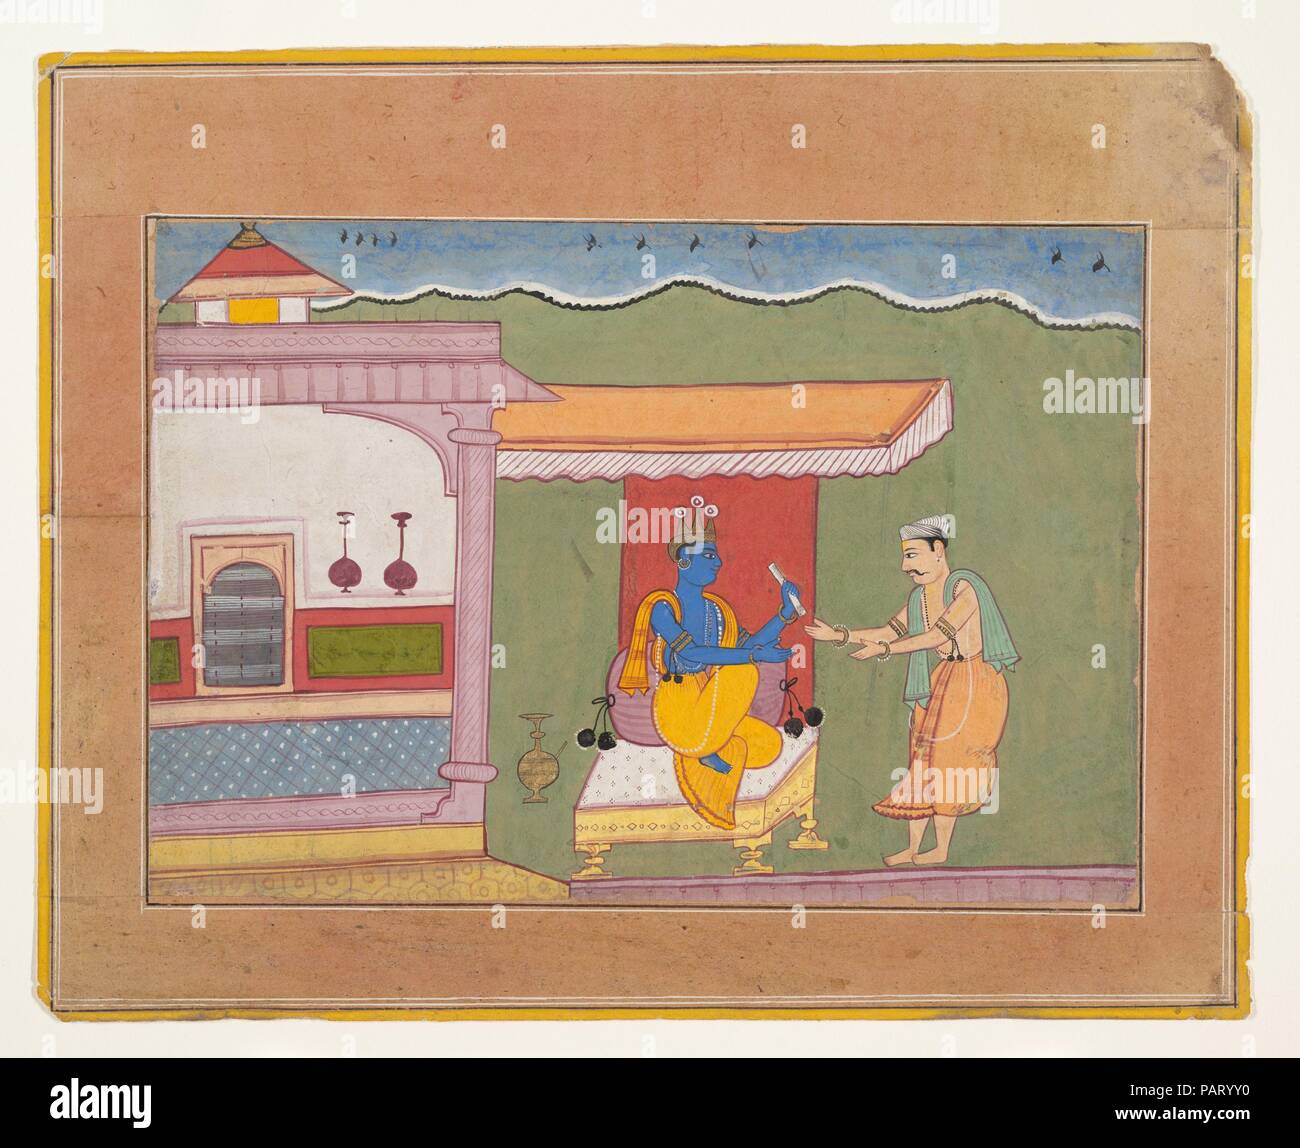 The Brahmin Delivers Rukmini's Letter to Krishna: Page from a Dispersed Bhagavata Purana (Ancient Stories of Lord Vishnu). Culture: India (Rajasthan, Bikaner). Dimensions: 6 3/4 x 9 7/8 in. (17.1 x 25.1 cm). Date: ca. 1610.  Krishna, seated on a throne, holds a letter from his future wife, Rukmini, delivered by the Brahmin standing before him (Bhagavata Purana 10.52.37-.43). Museum: Metropolitan Museum of Art, New York, USA. Stock Photo